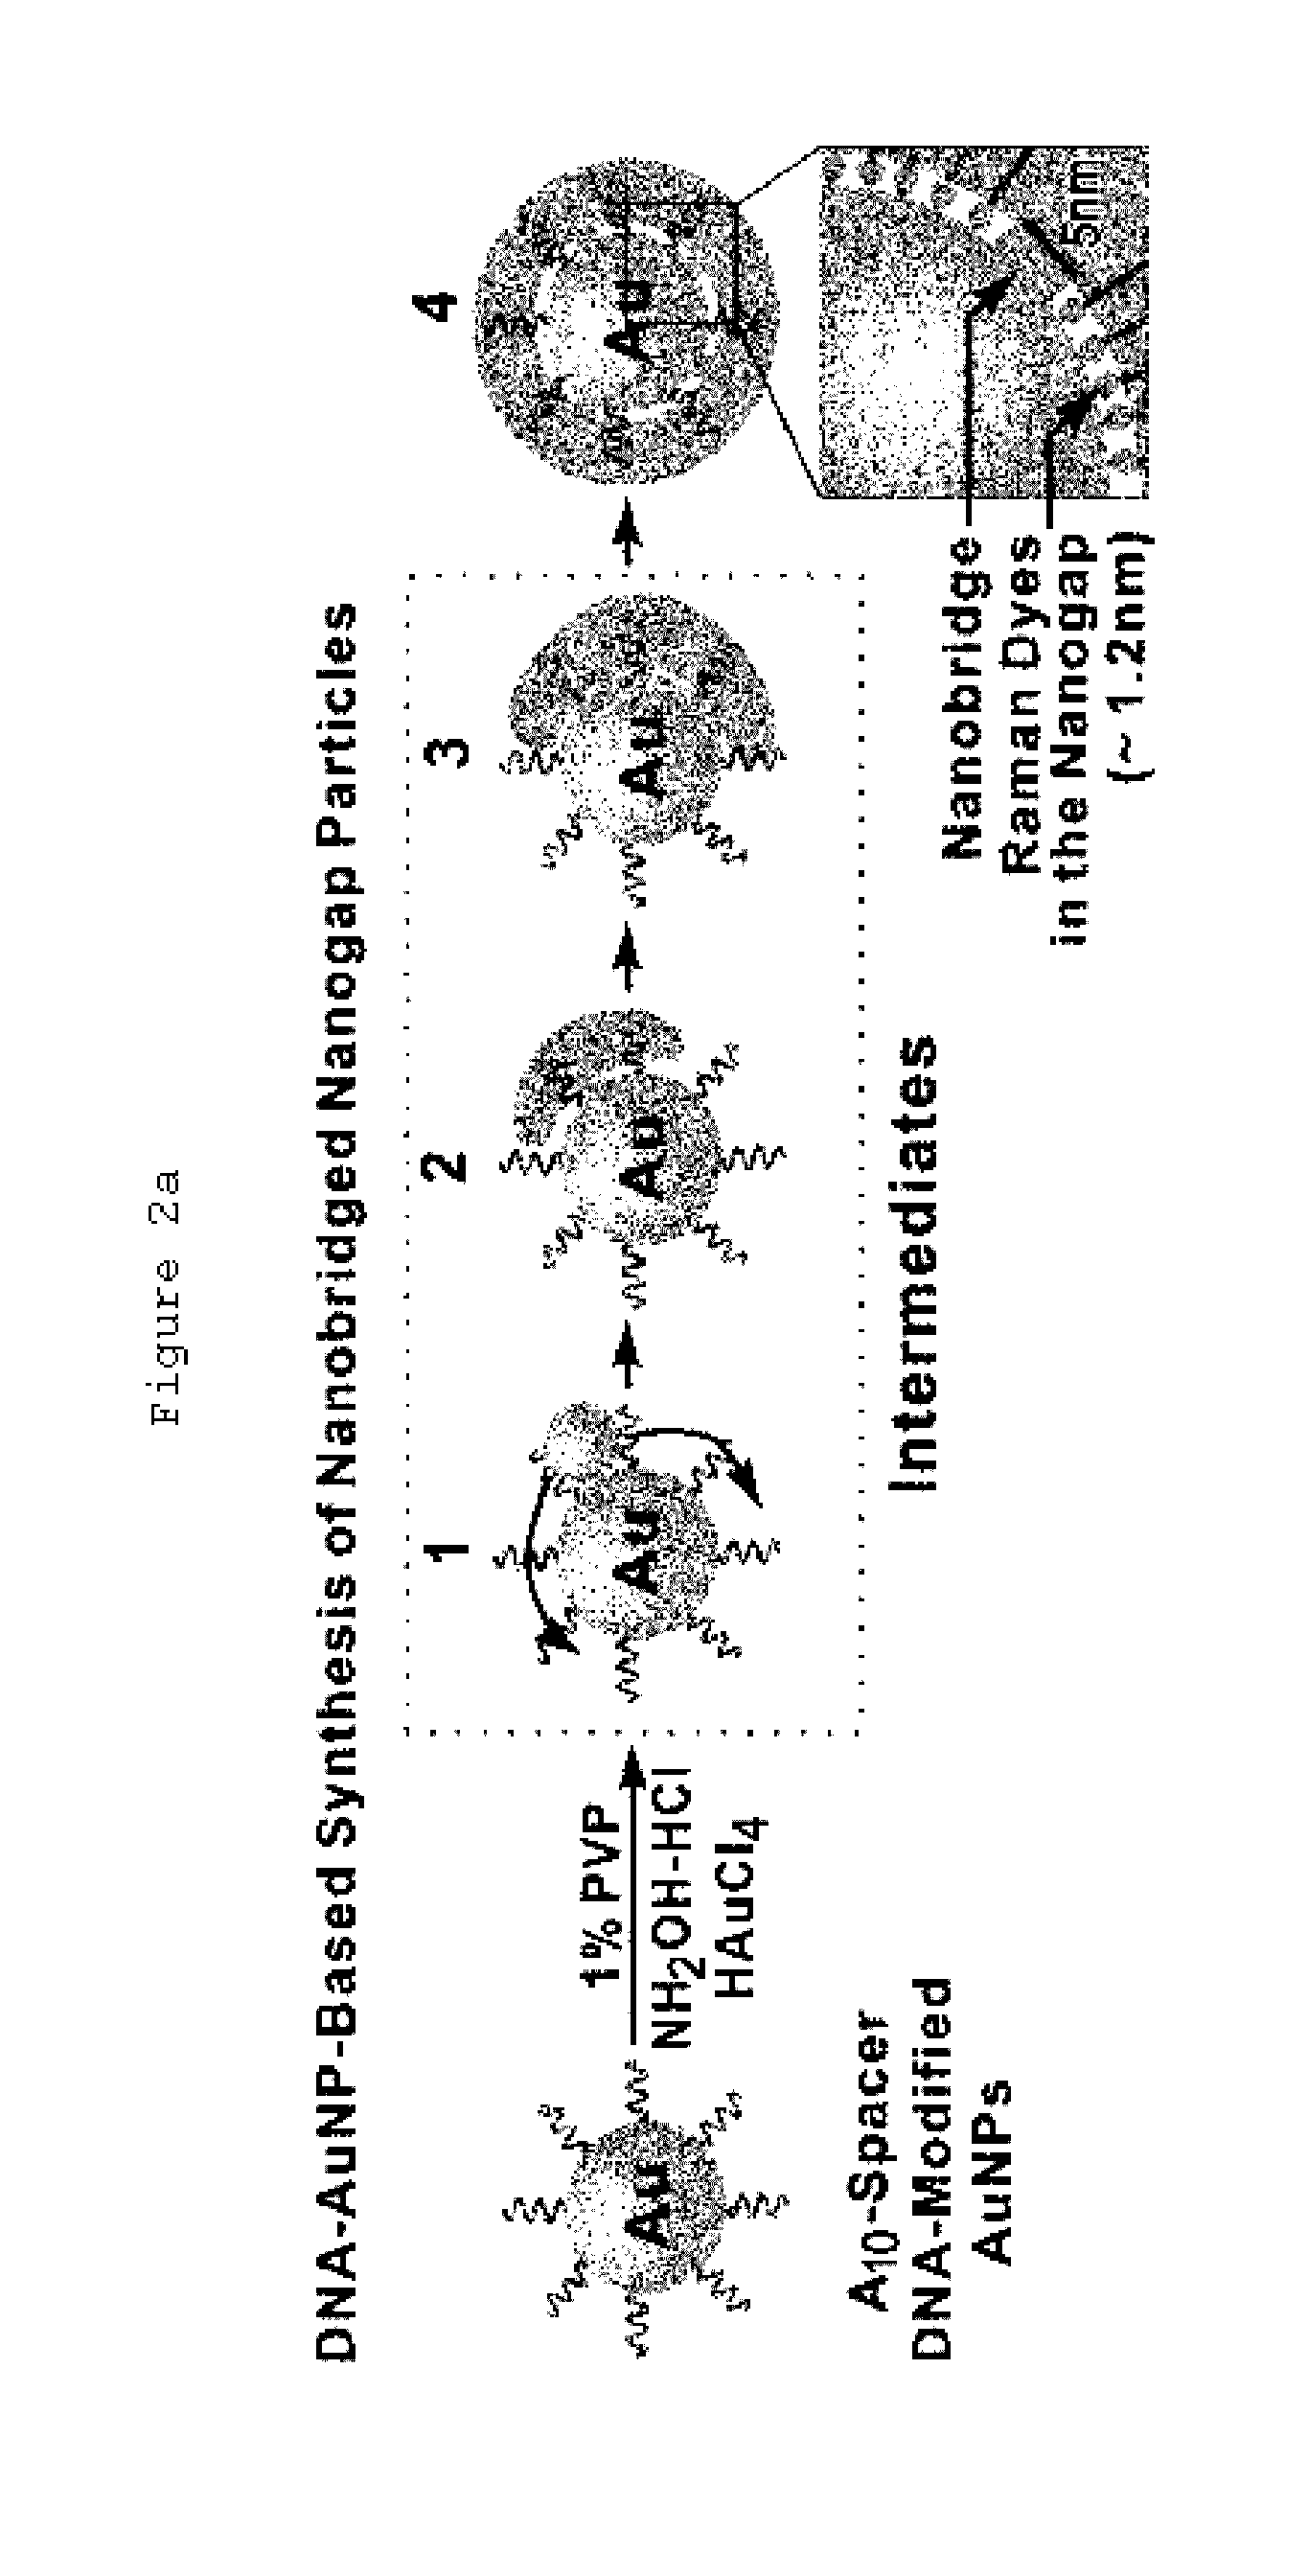 Single nanoparticle having a nanogap between a core material and a shell material, and preparation method thereof